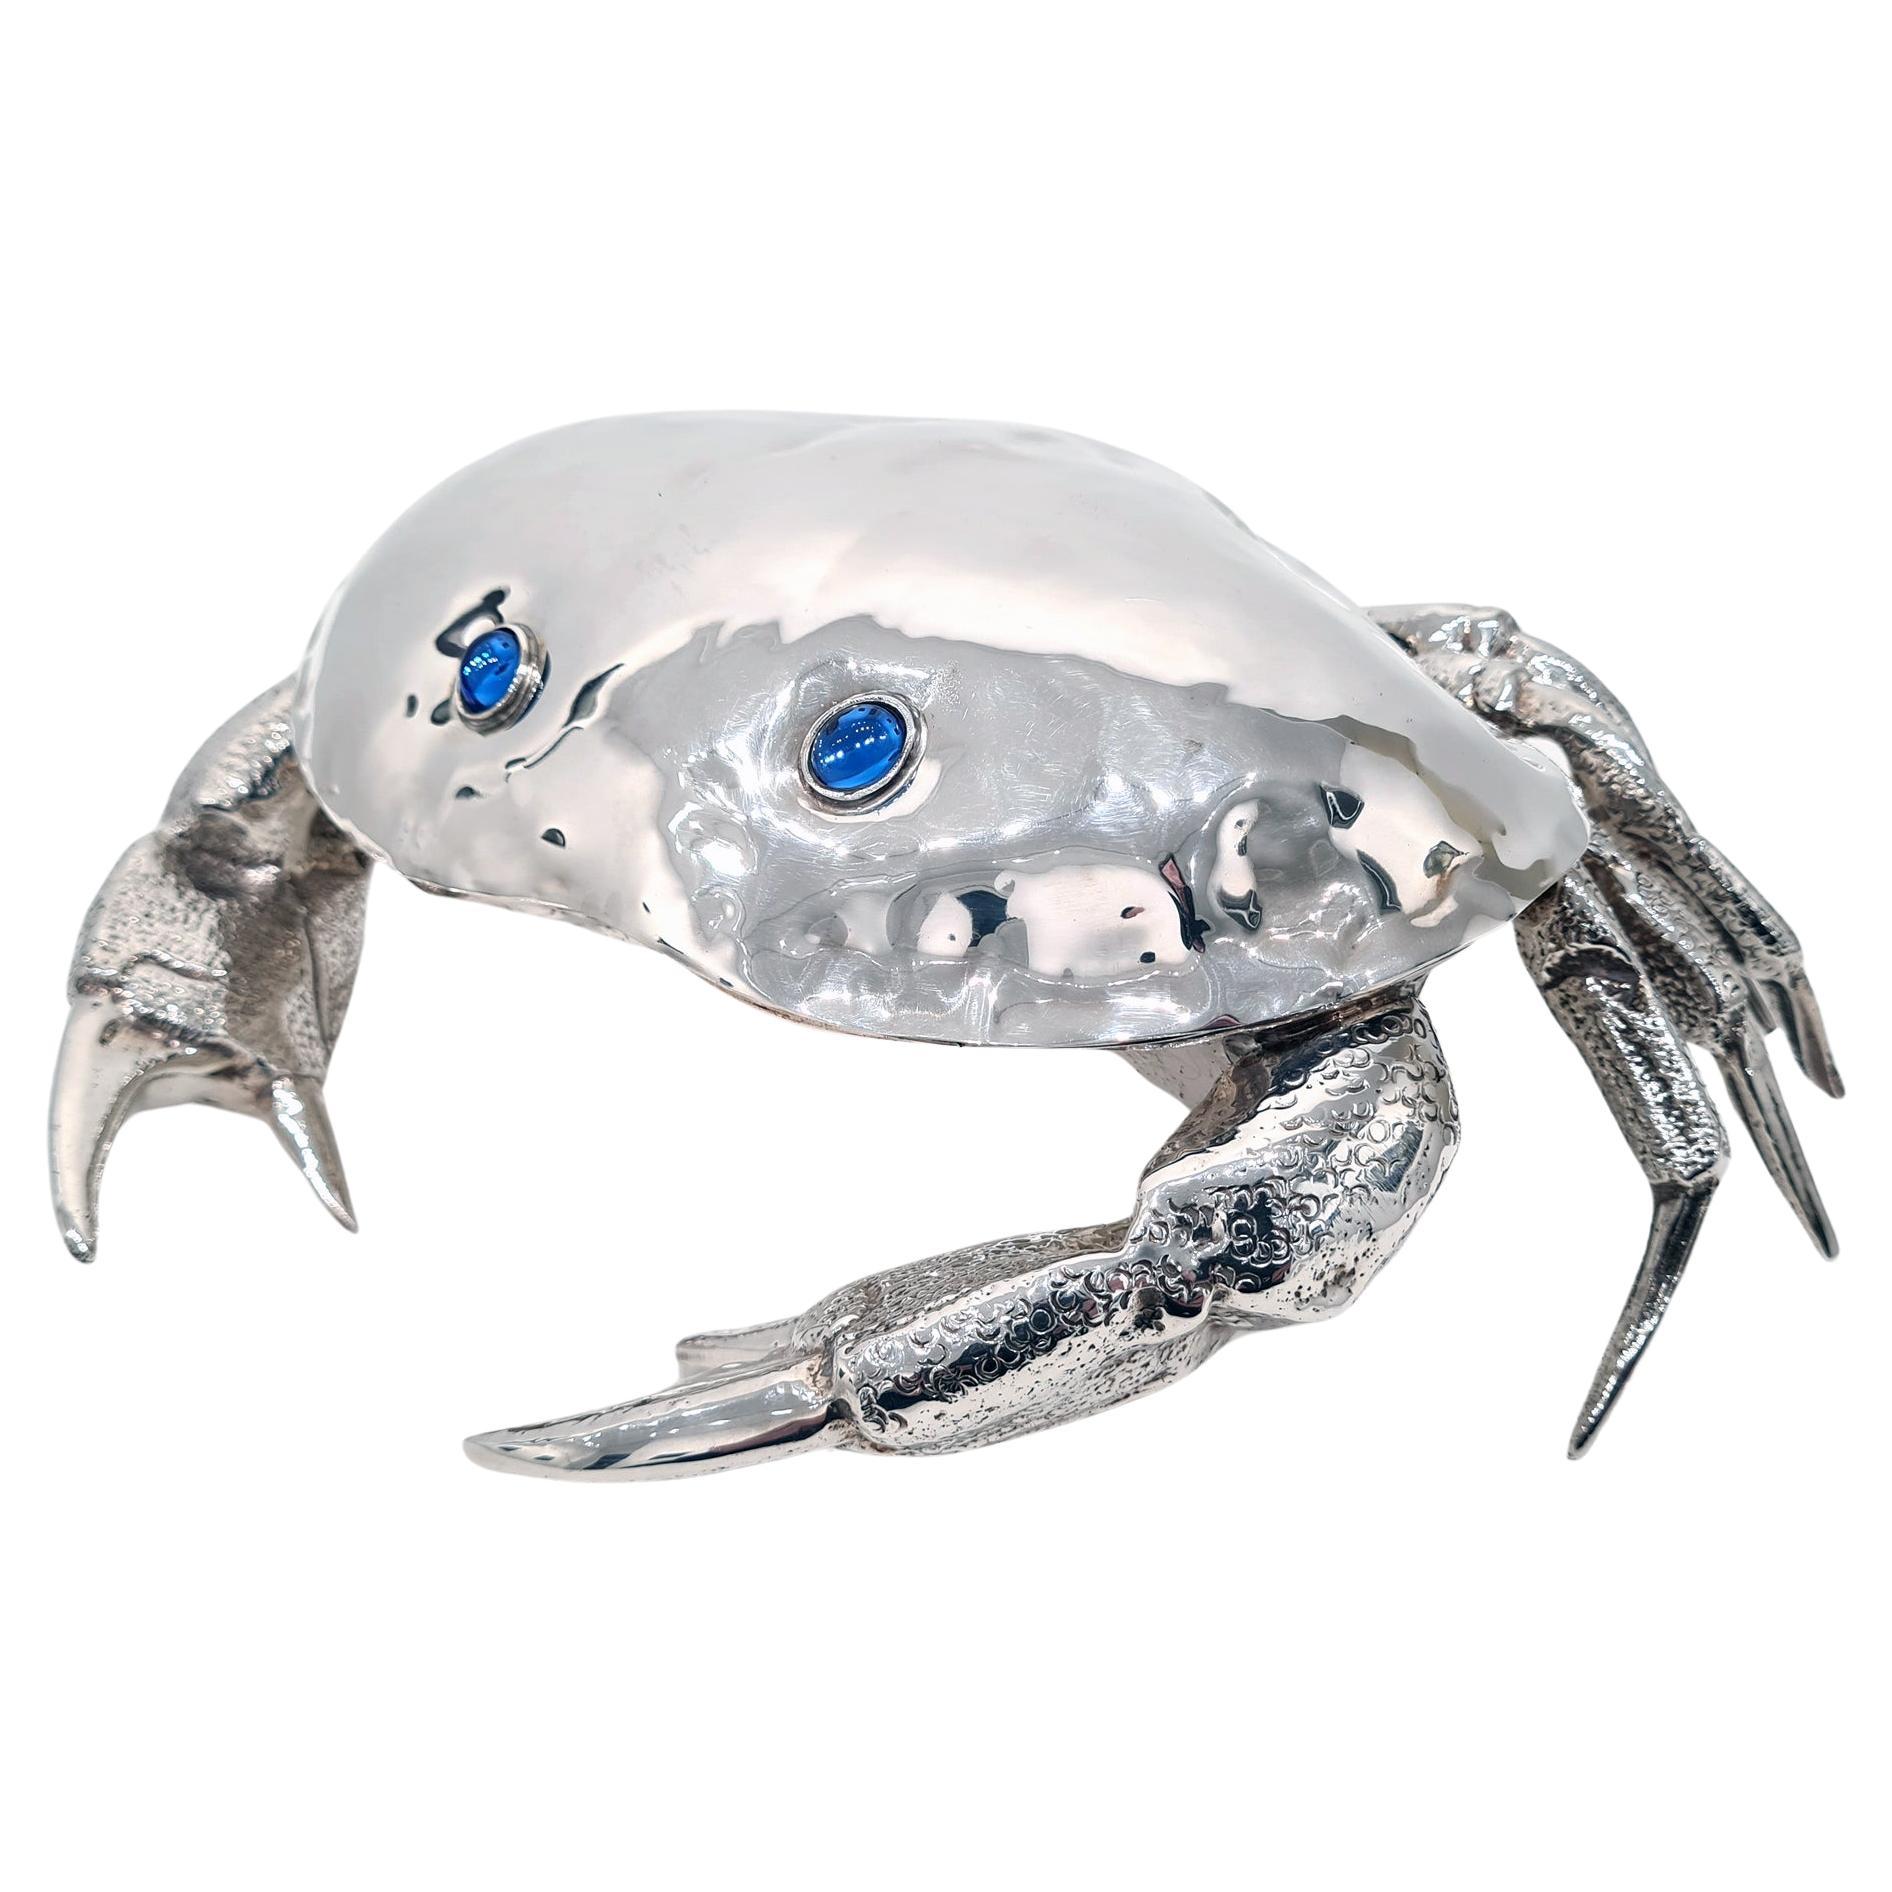 Vintage Silver Plated Caviar Dish in the Shape of a Crab, c. 1970  For Sale